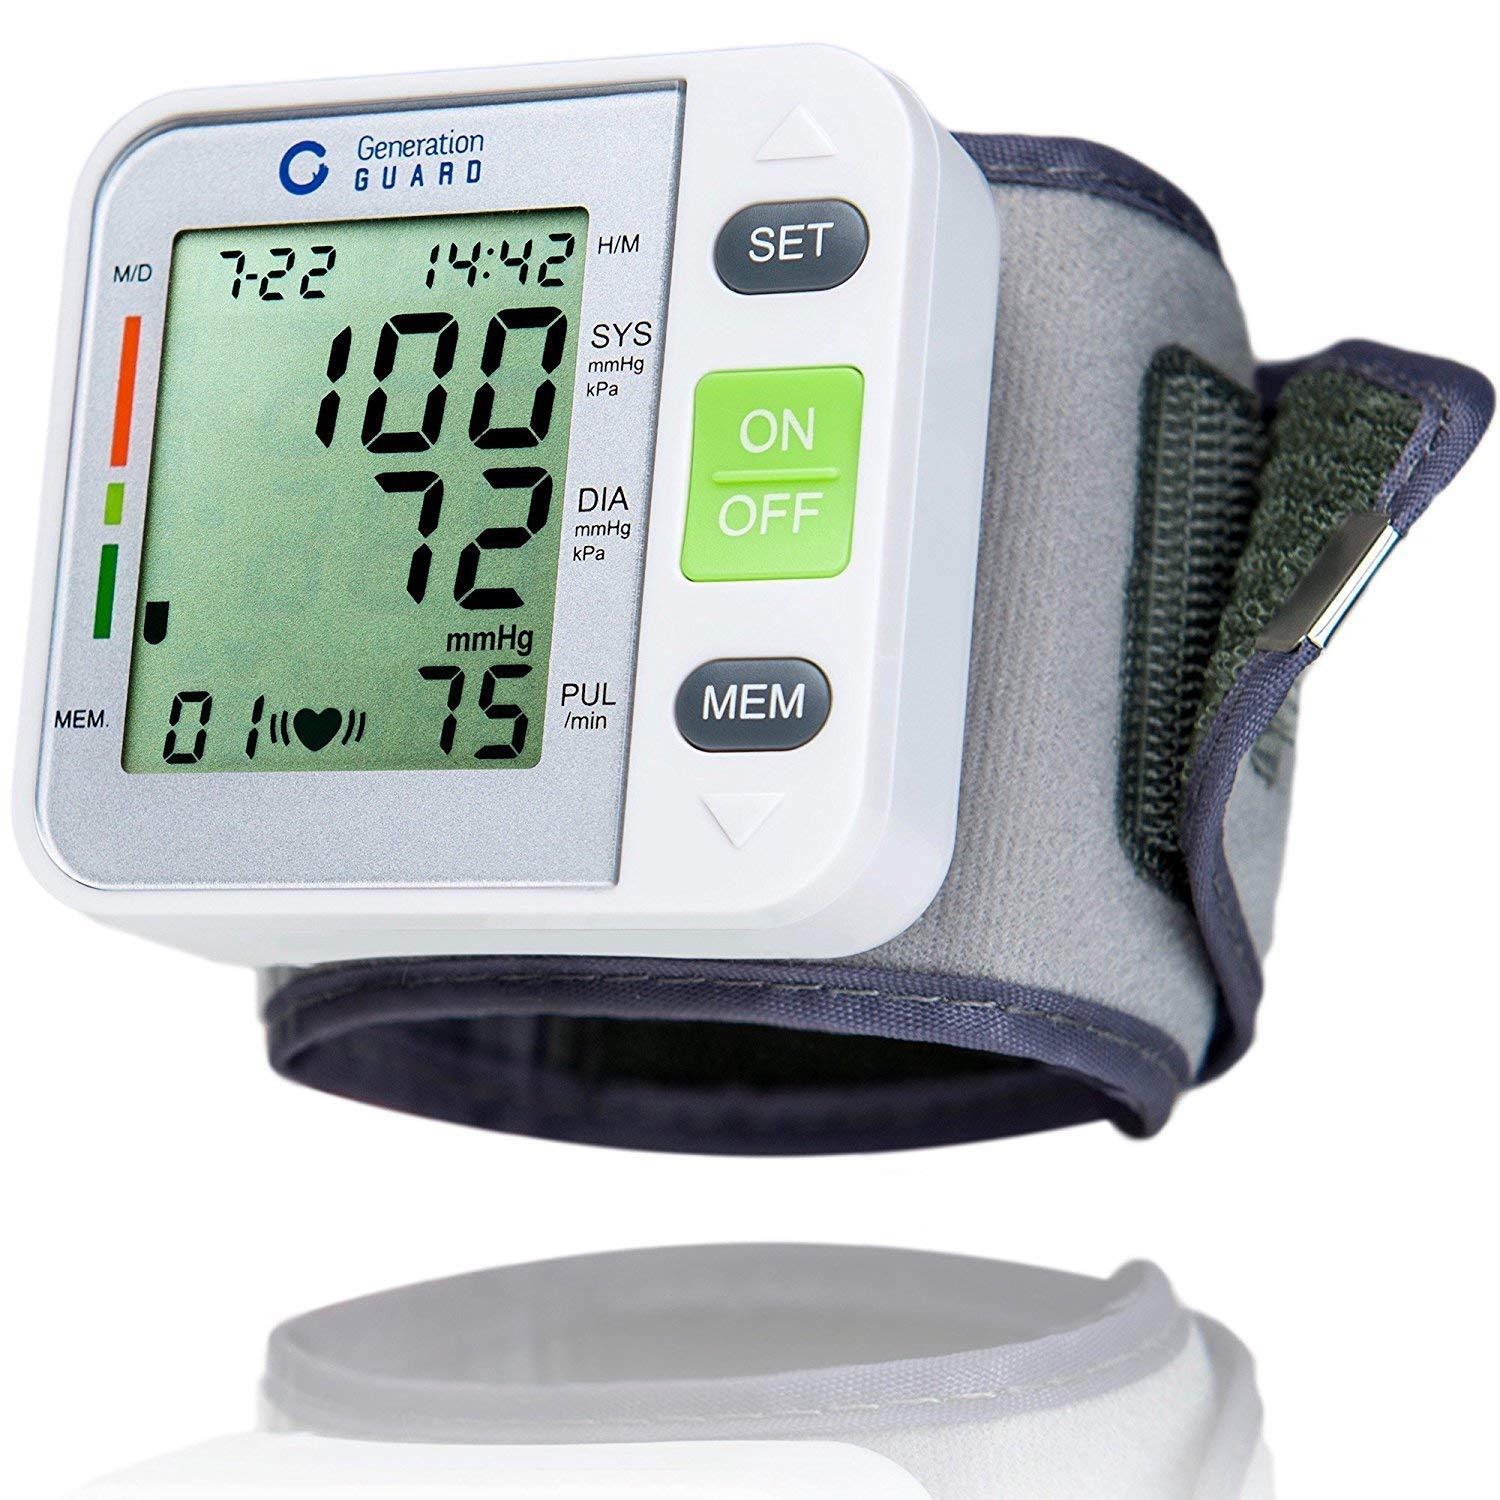 FDA Approves Biobeat's Blood Pressure Monitoring Devices